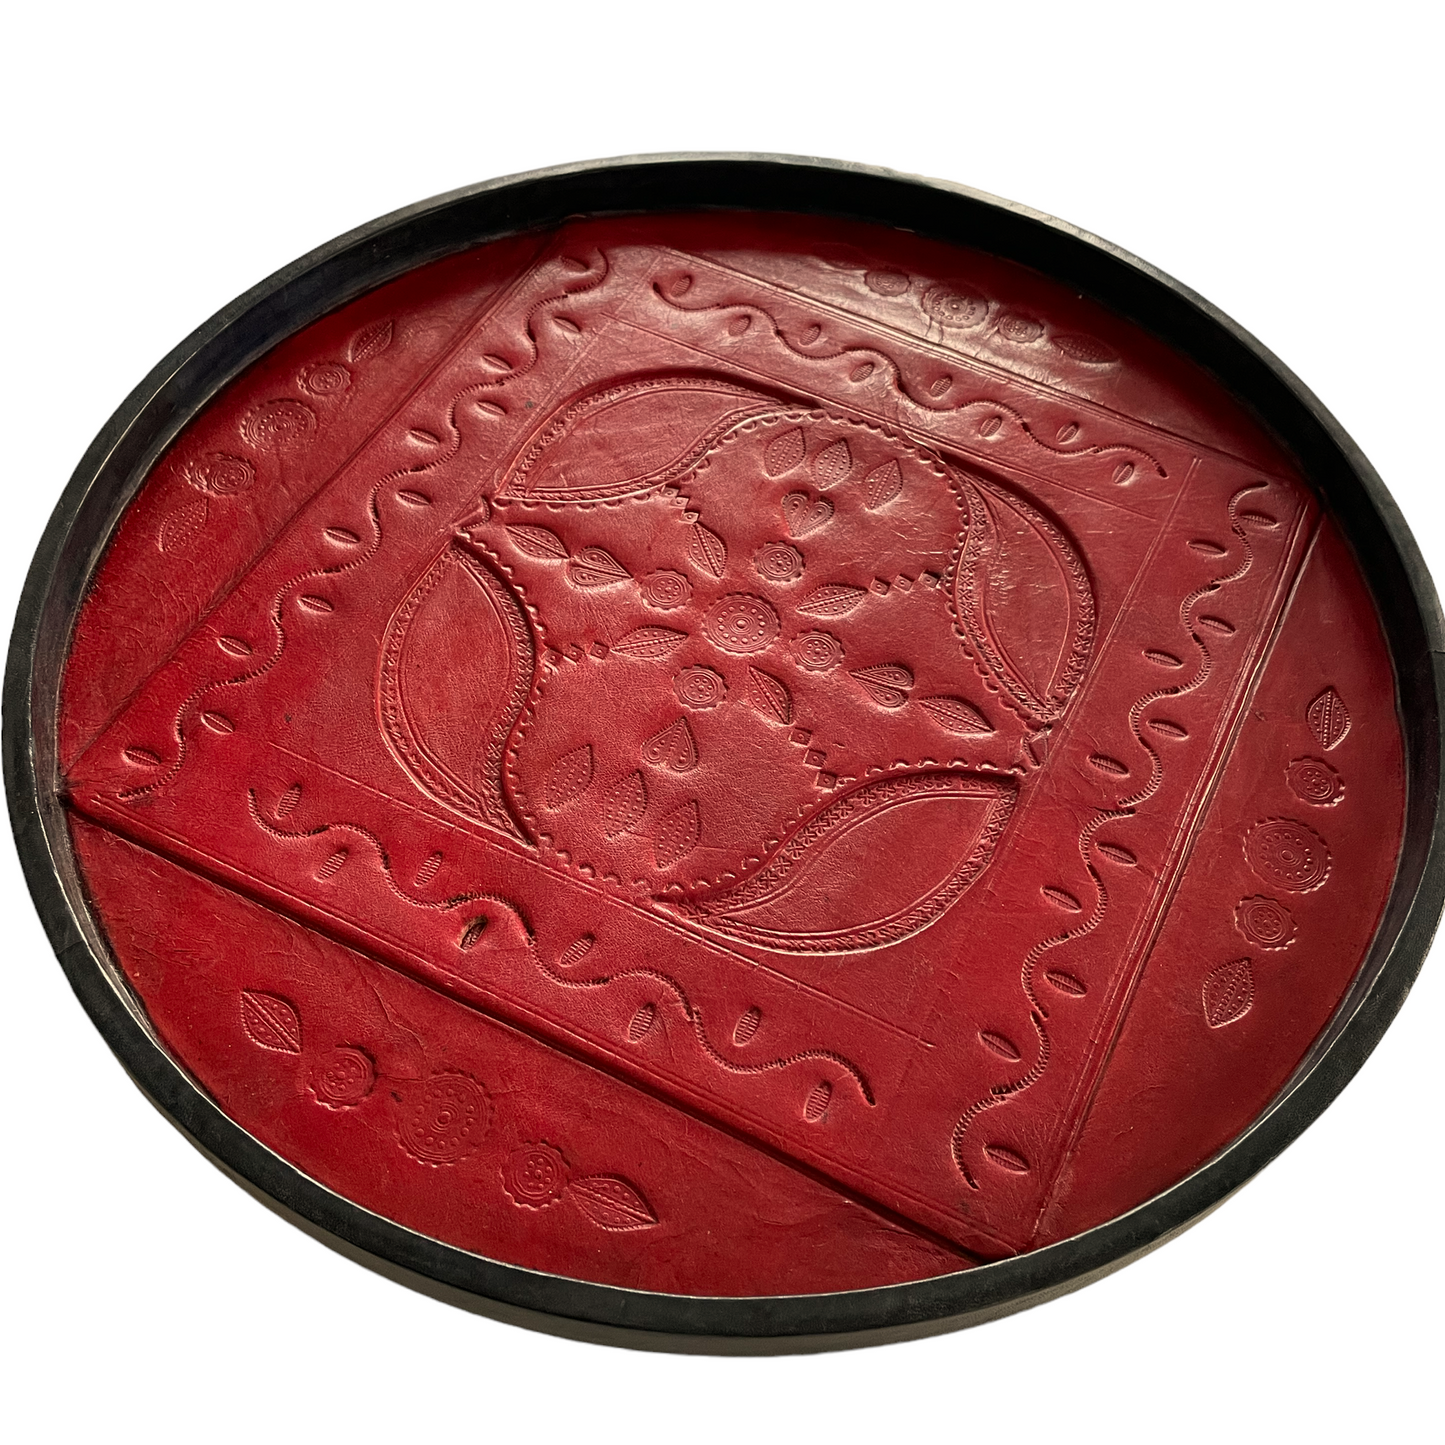 Serving tray in leather, red and black, 40 cm in diameter. Handmade and Fair Trade from Senegal